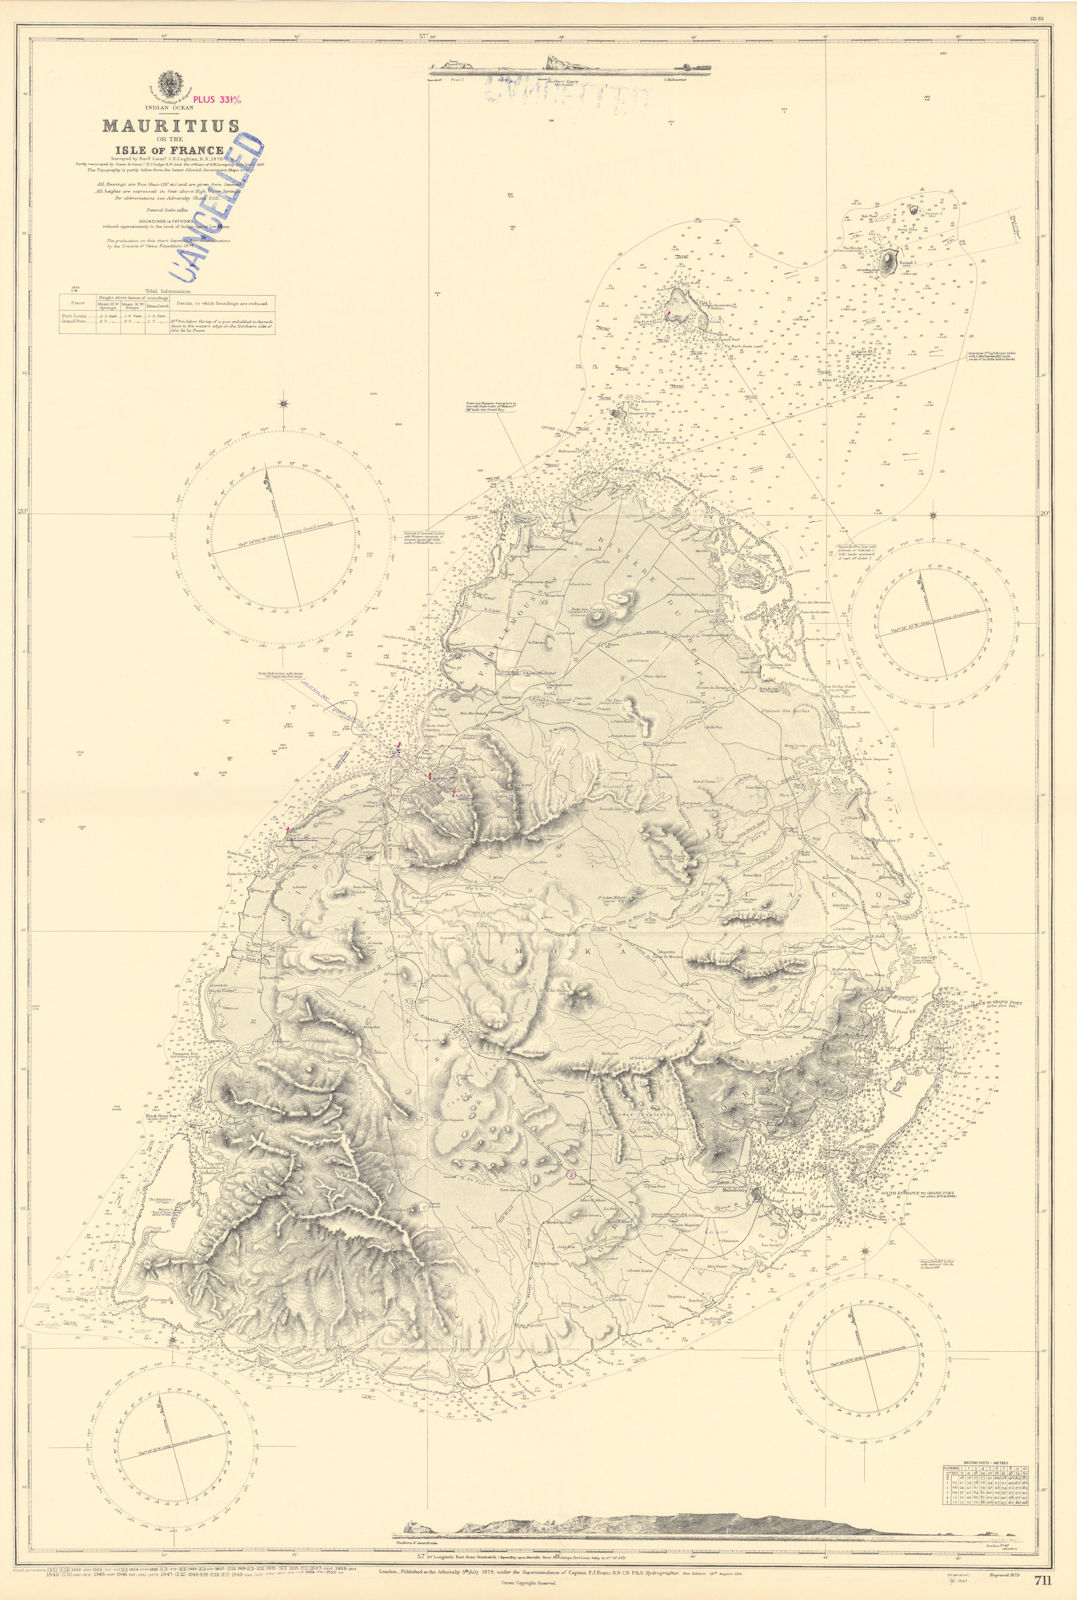 Mauritius or Isle of France, Indian Ocean. ADMIRALTY sea chart 1879 (1955) map